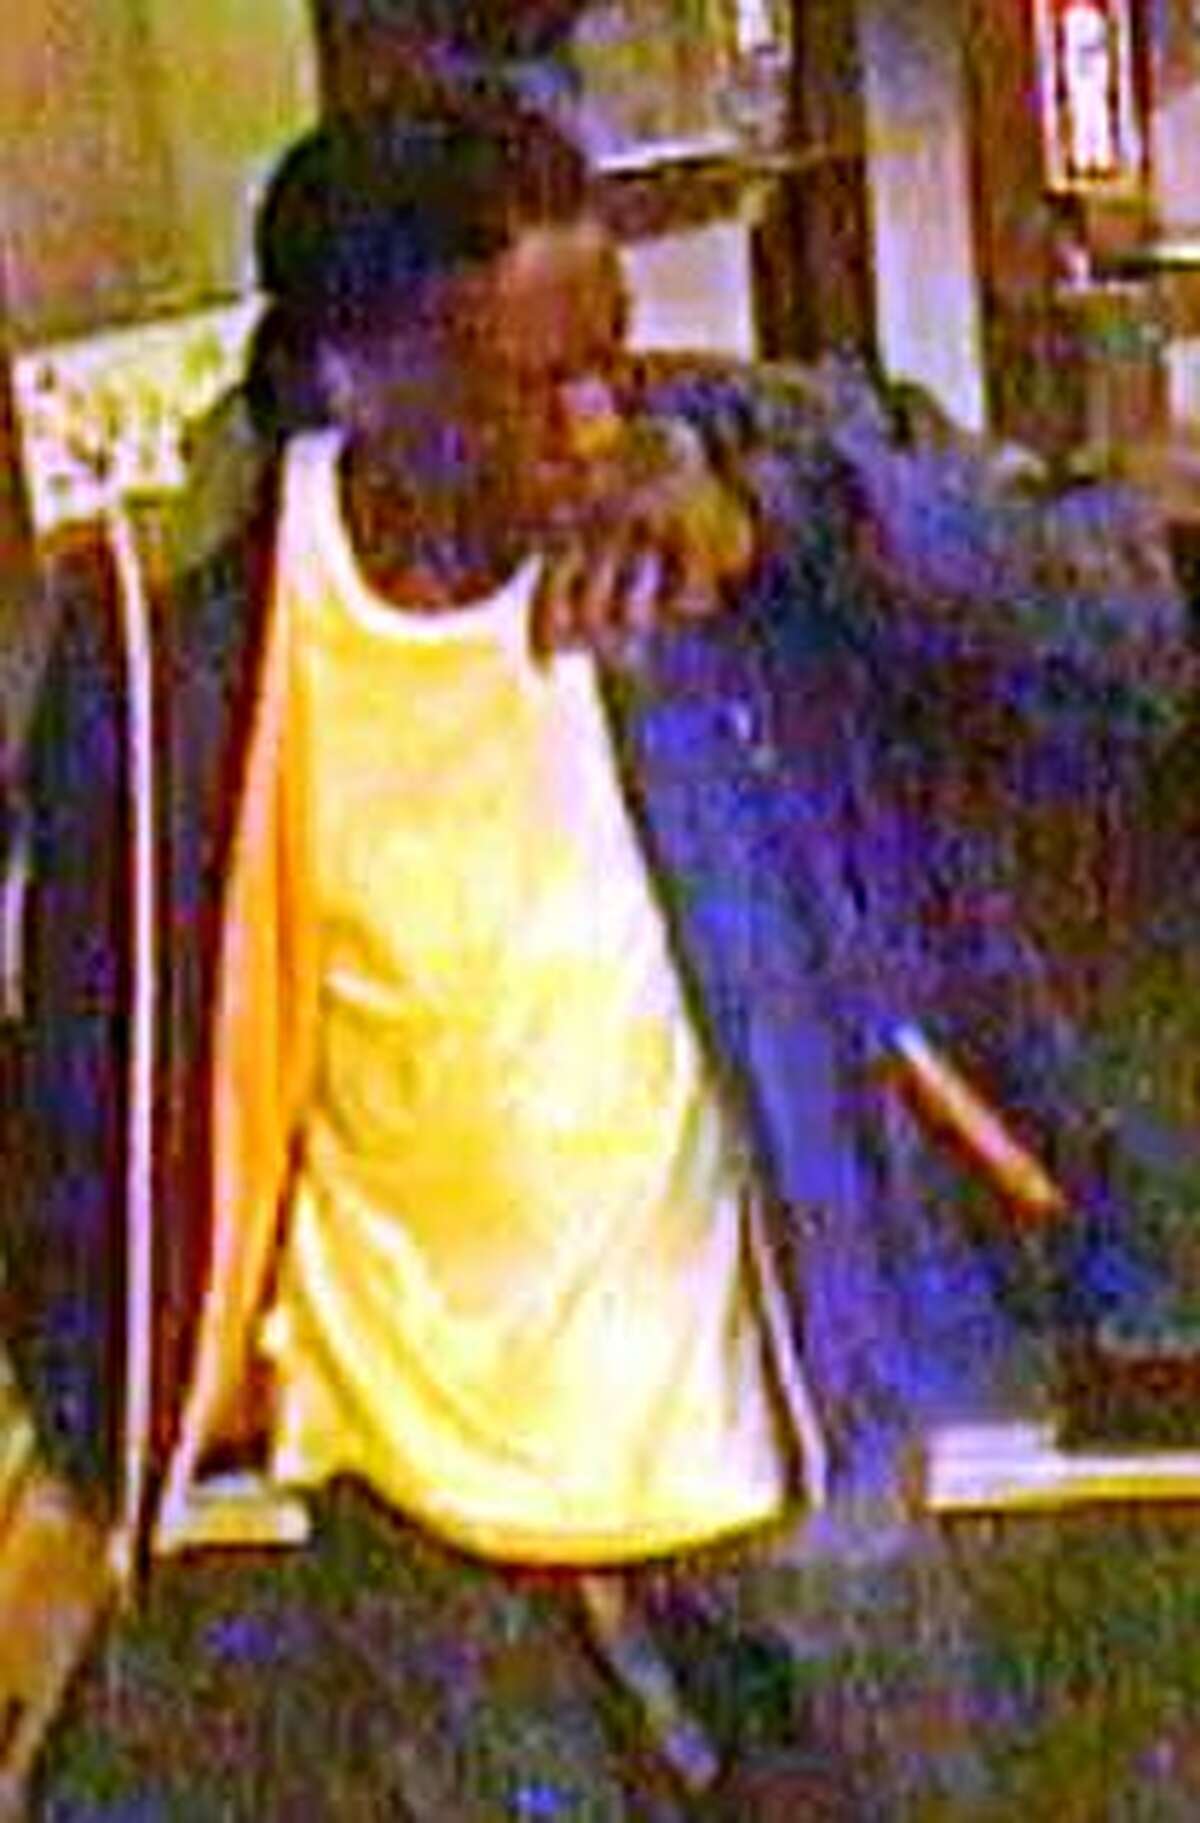 Norwalk detectives are investigating a commercial burglary that occurred on September 25, 2017 at 11:28 p.m. at the Rite Aid located at 190 East Ave. The pictured individual entered the store prior to closing and hid in the rear of the store until employees left for the night.